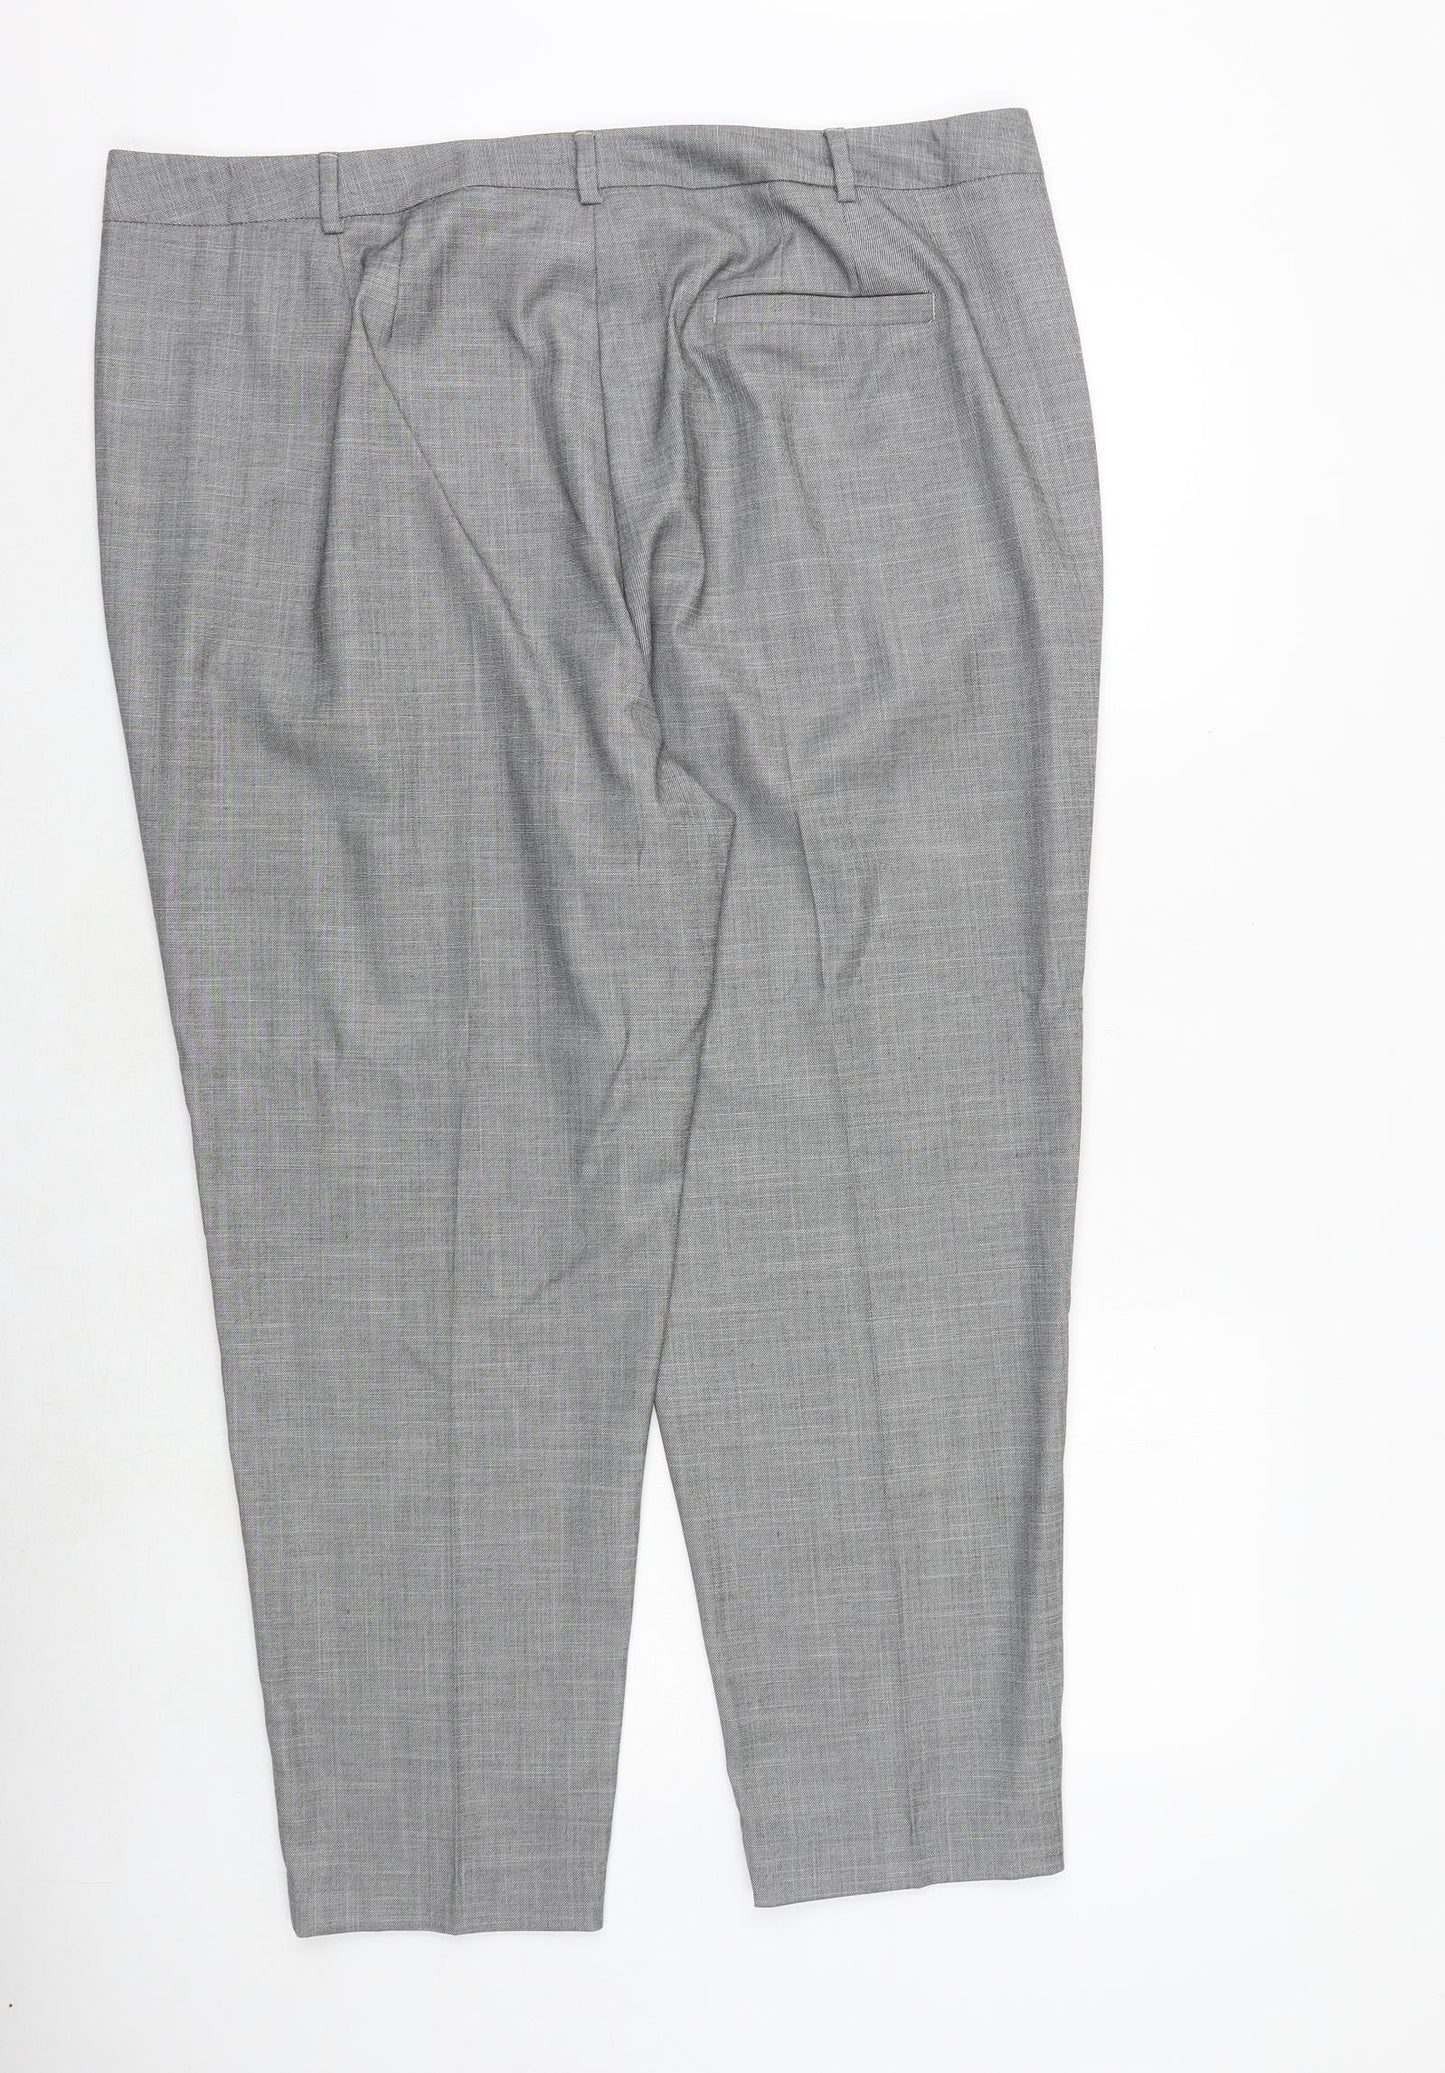 Marks and Spencer Womens Grey Polyester Dress Pants Trousers Size 20 Regular Zip